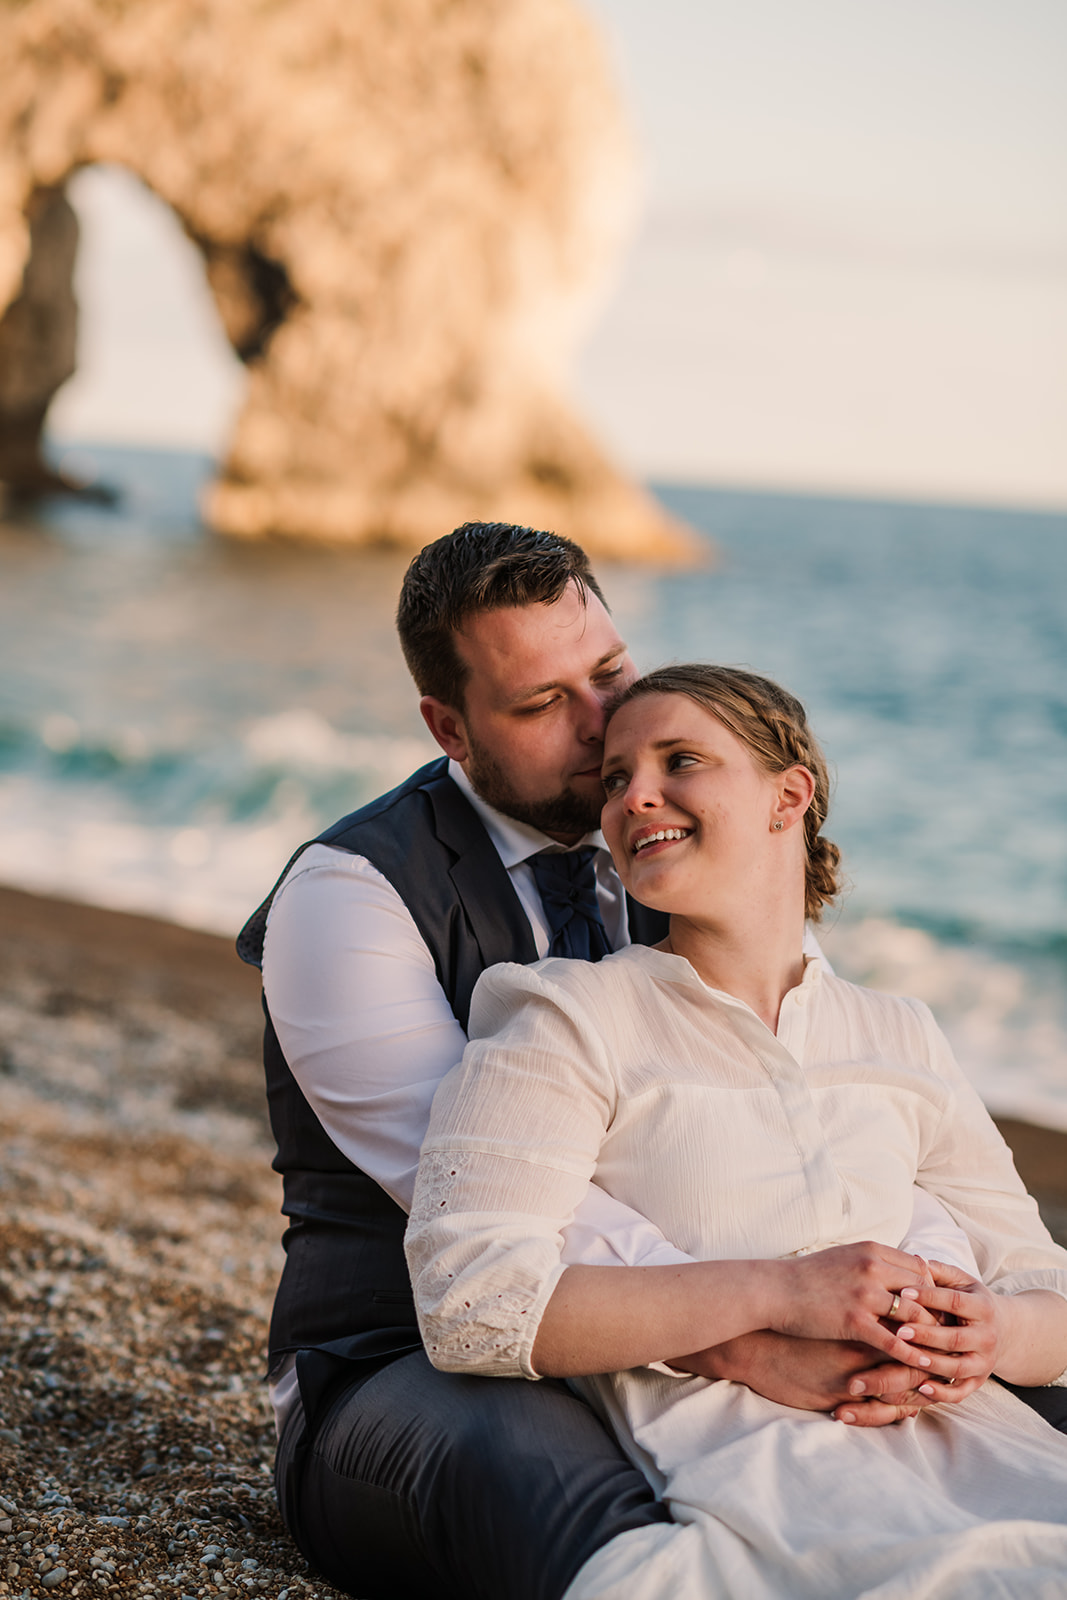 Photography of newlyweds at Durdle Door